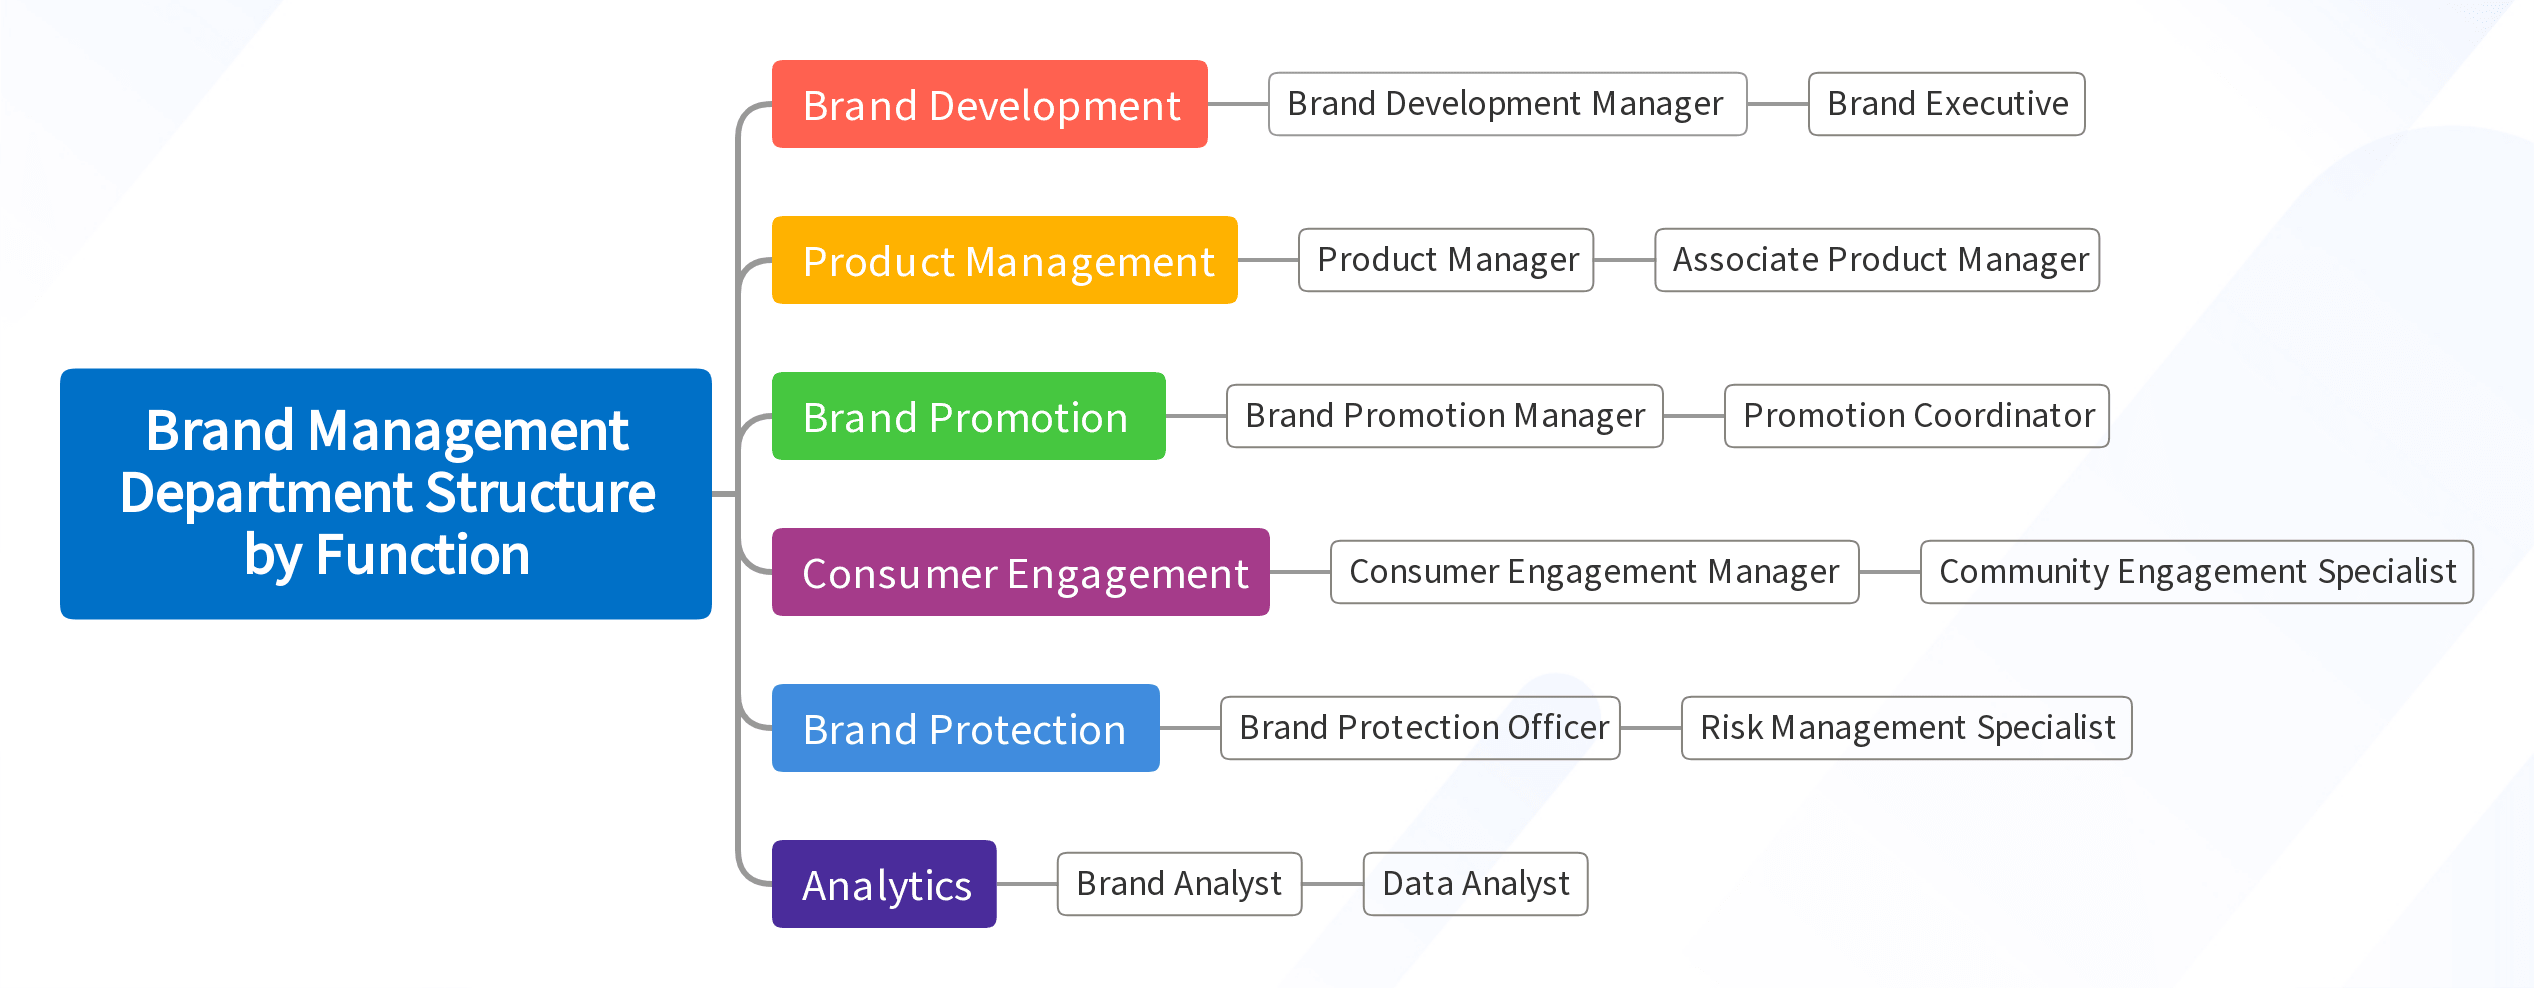 Brand Management Department Structure by Function